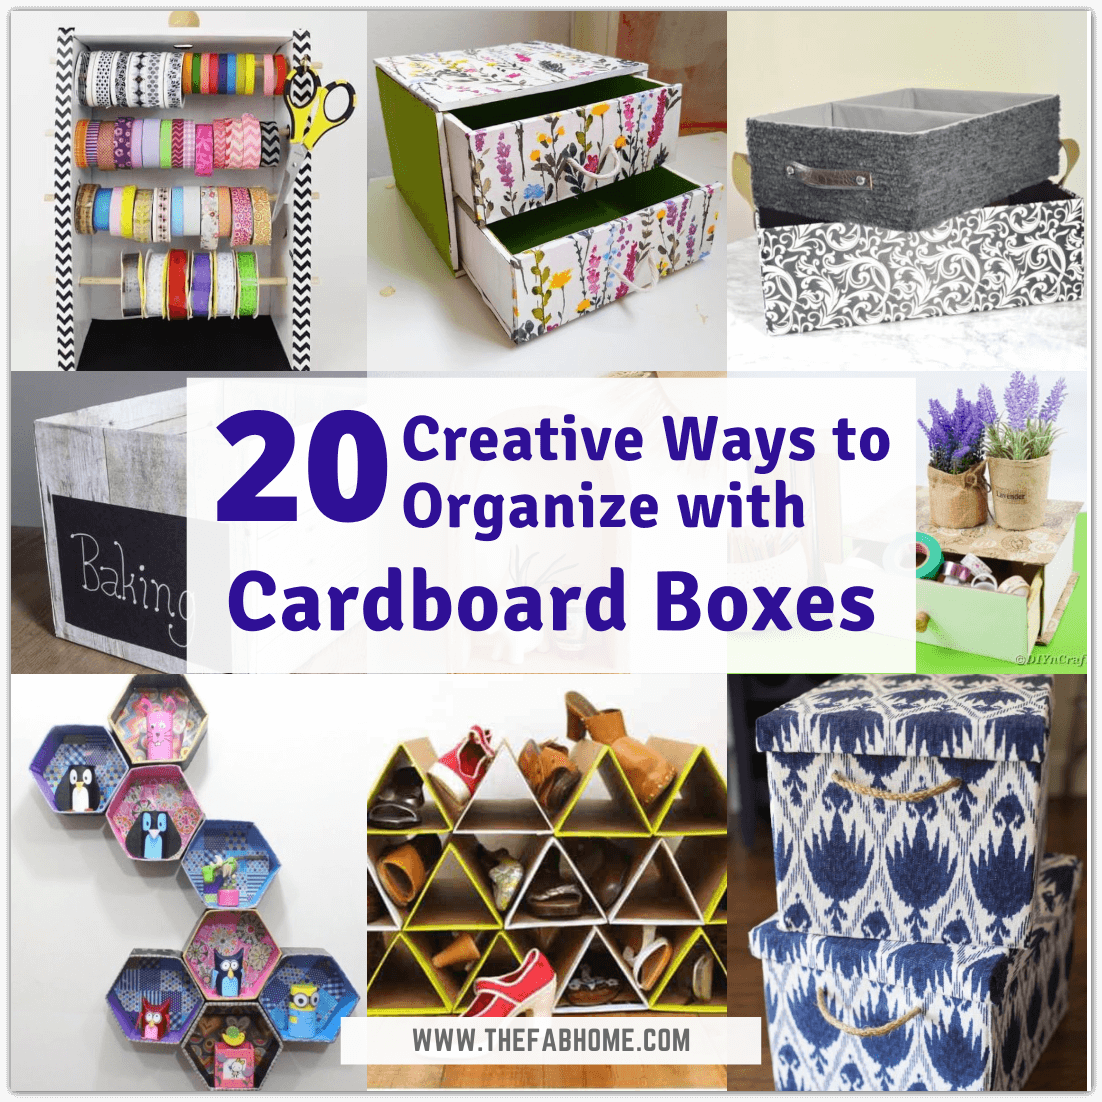 https://thefabhome.com/wp-content/uploads/2021/06/Ways-to-Organize-with-Cardboard-Boxes.png